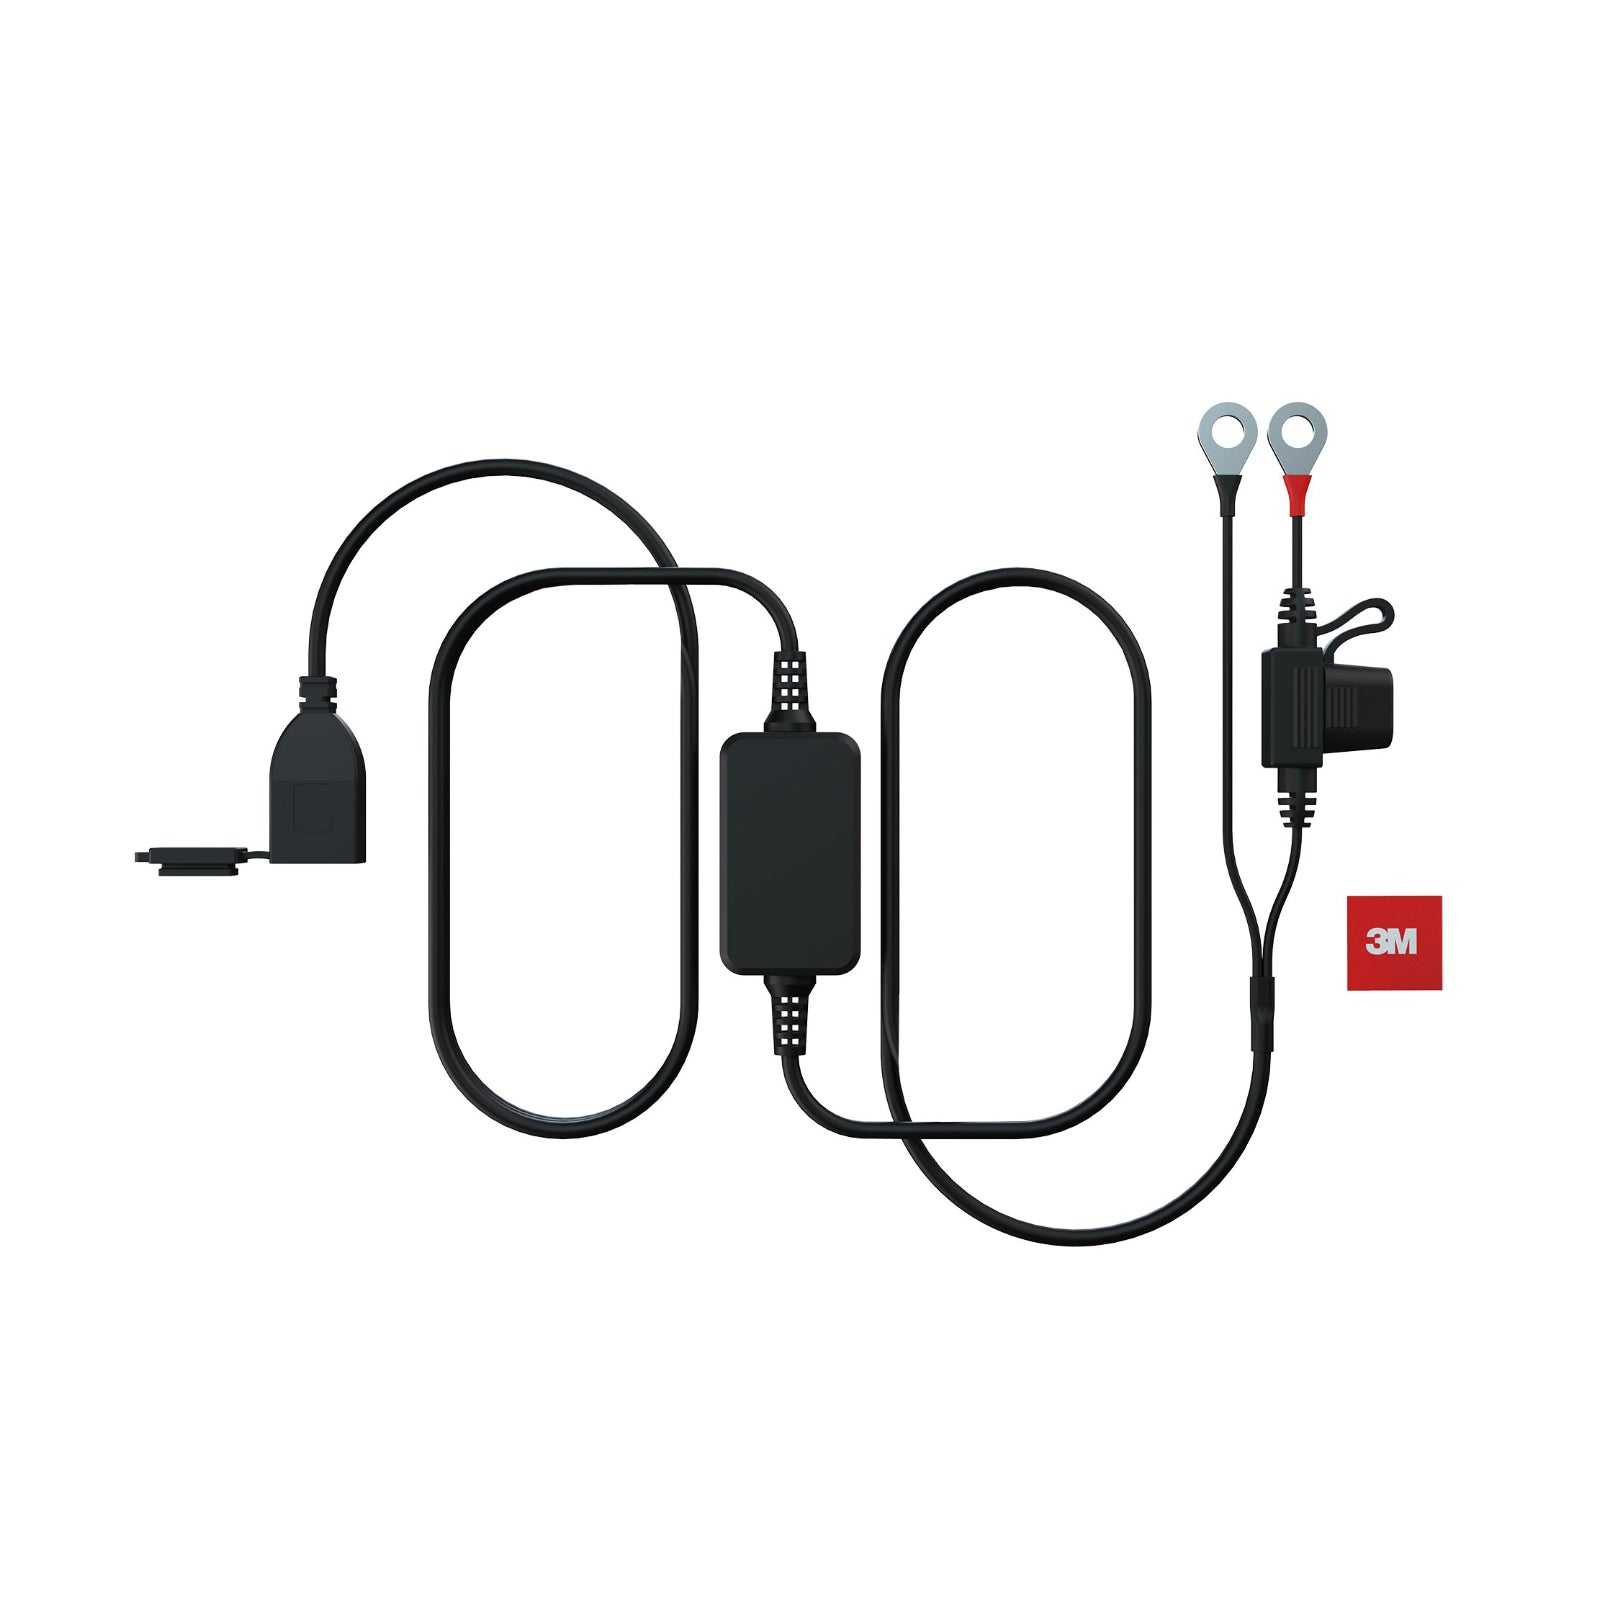 Oxford, OXFORD USB TYPE A 3.0 AMP CHARGING KIT